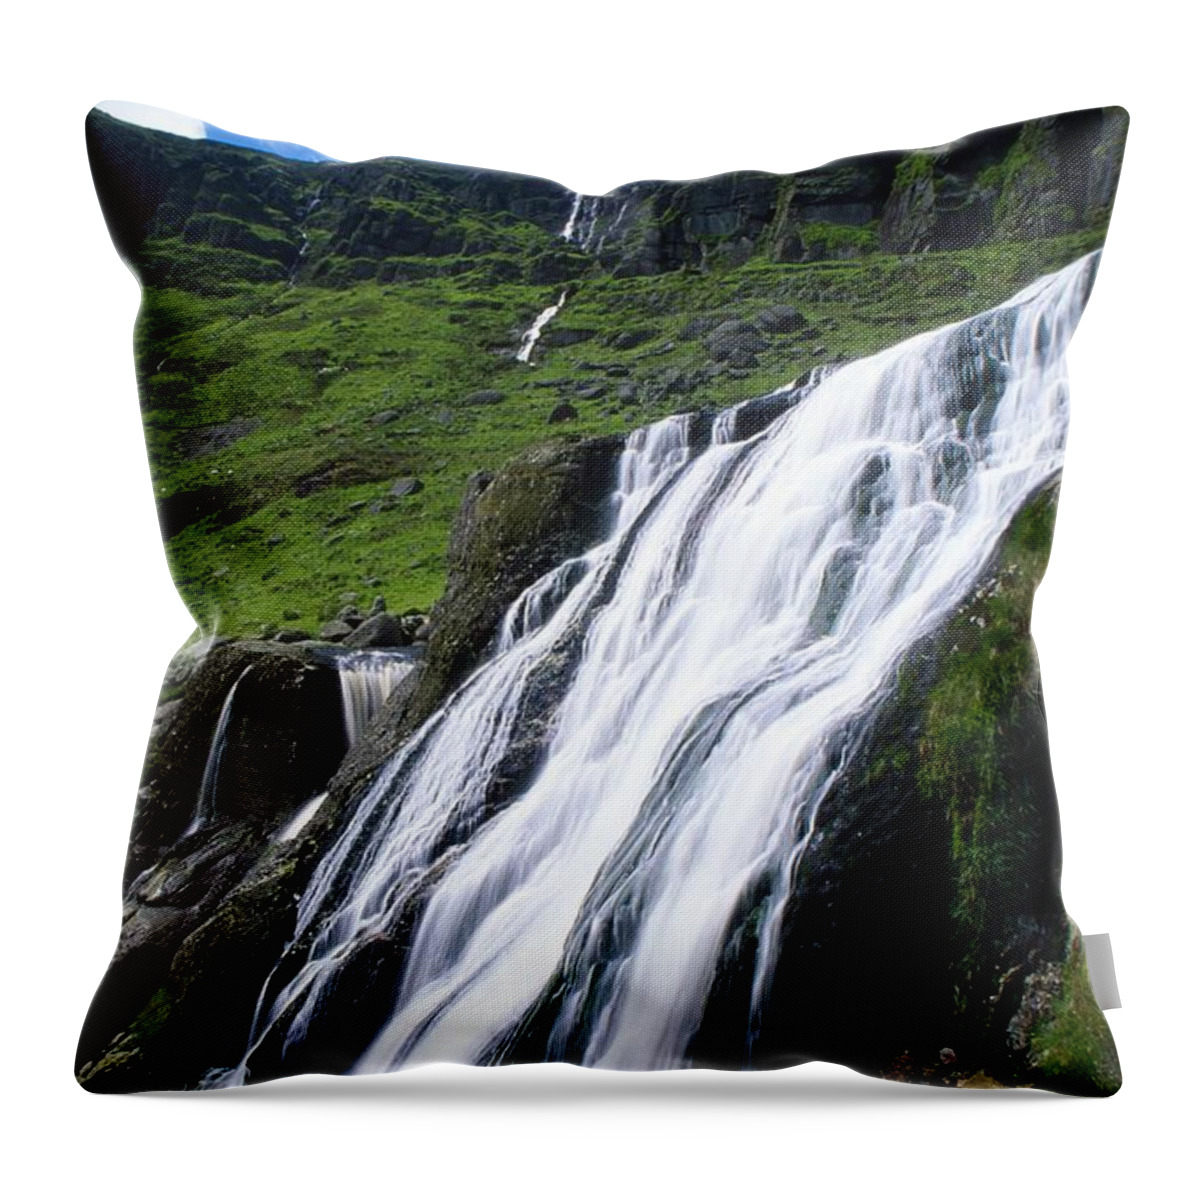 County Waterford Throw Pillow featuring the photograph Comeragh Mountains, County Waterford by Richard Cummins